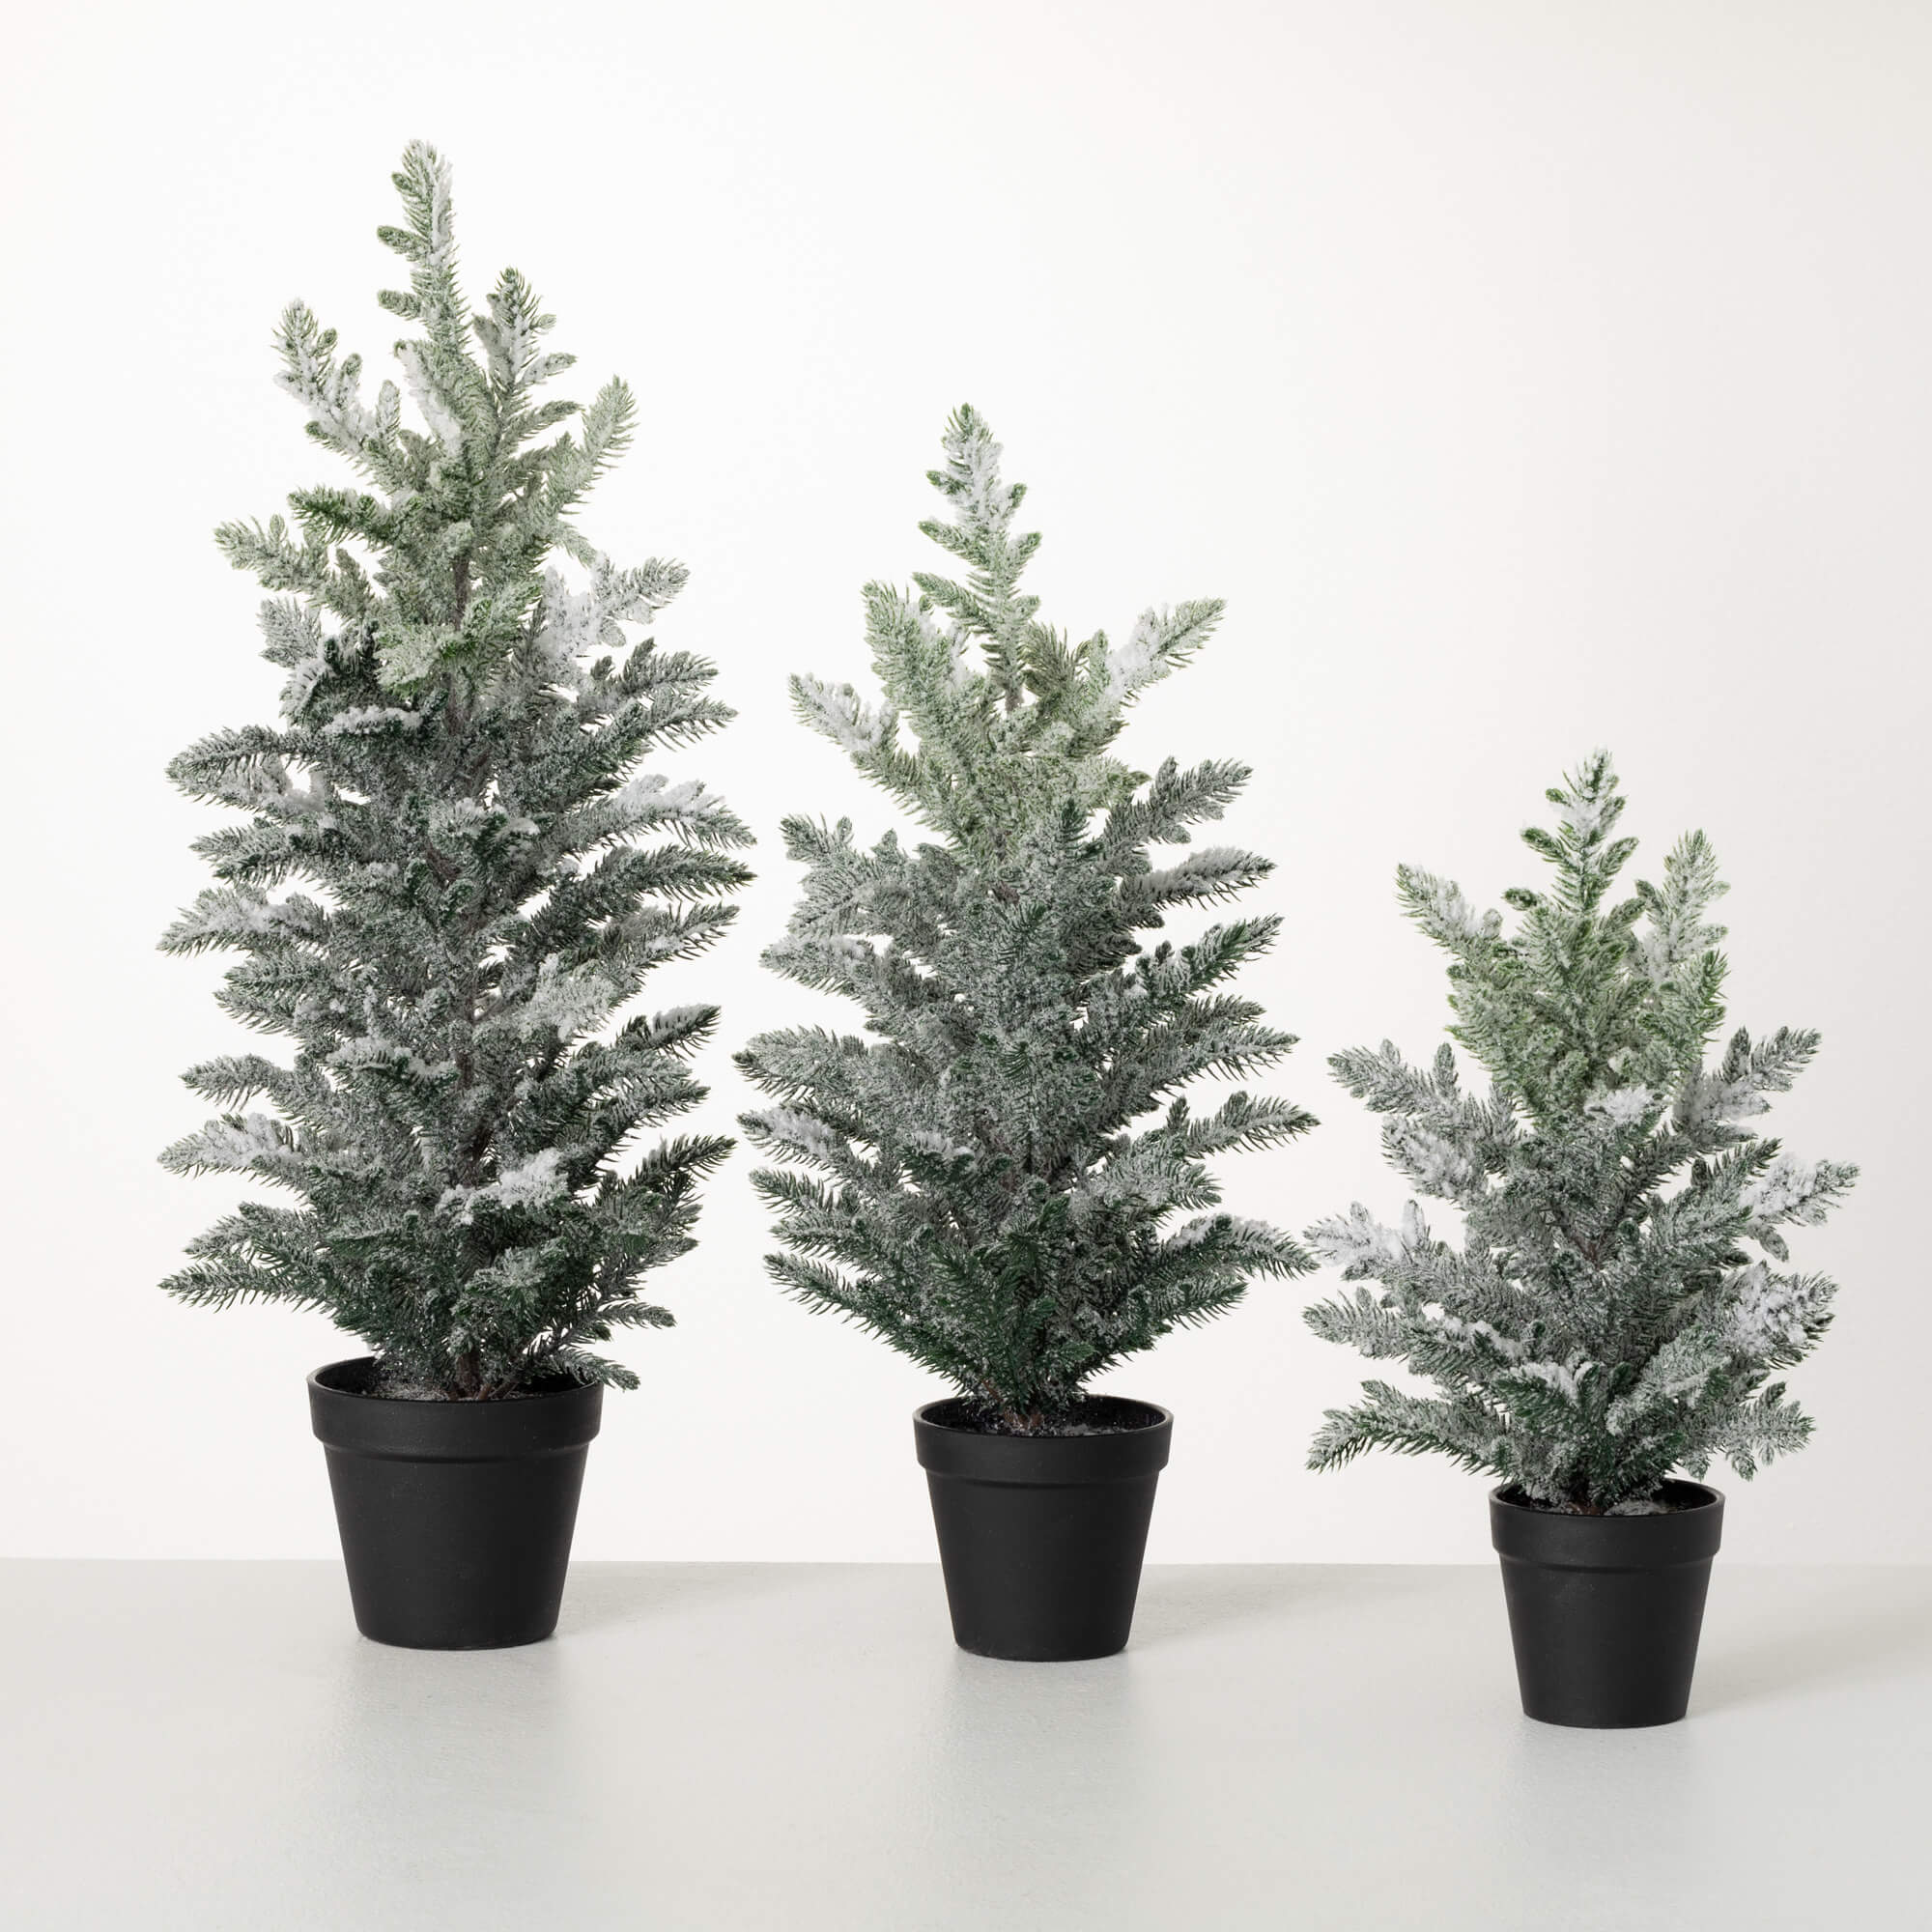 POTTED SNOWY PINE TREE SET 3